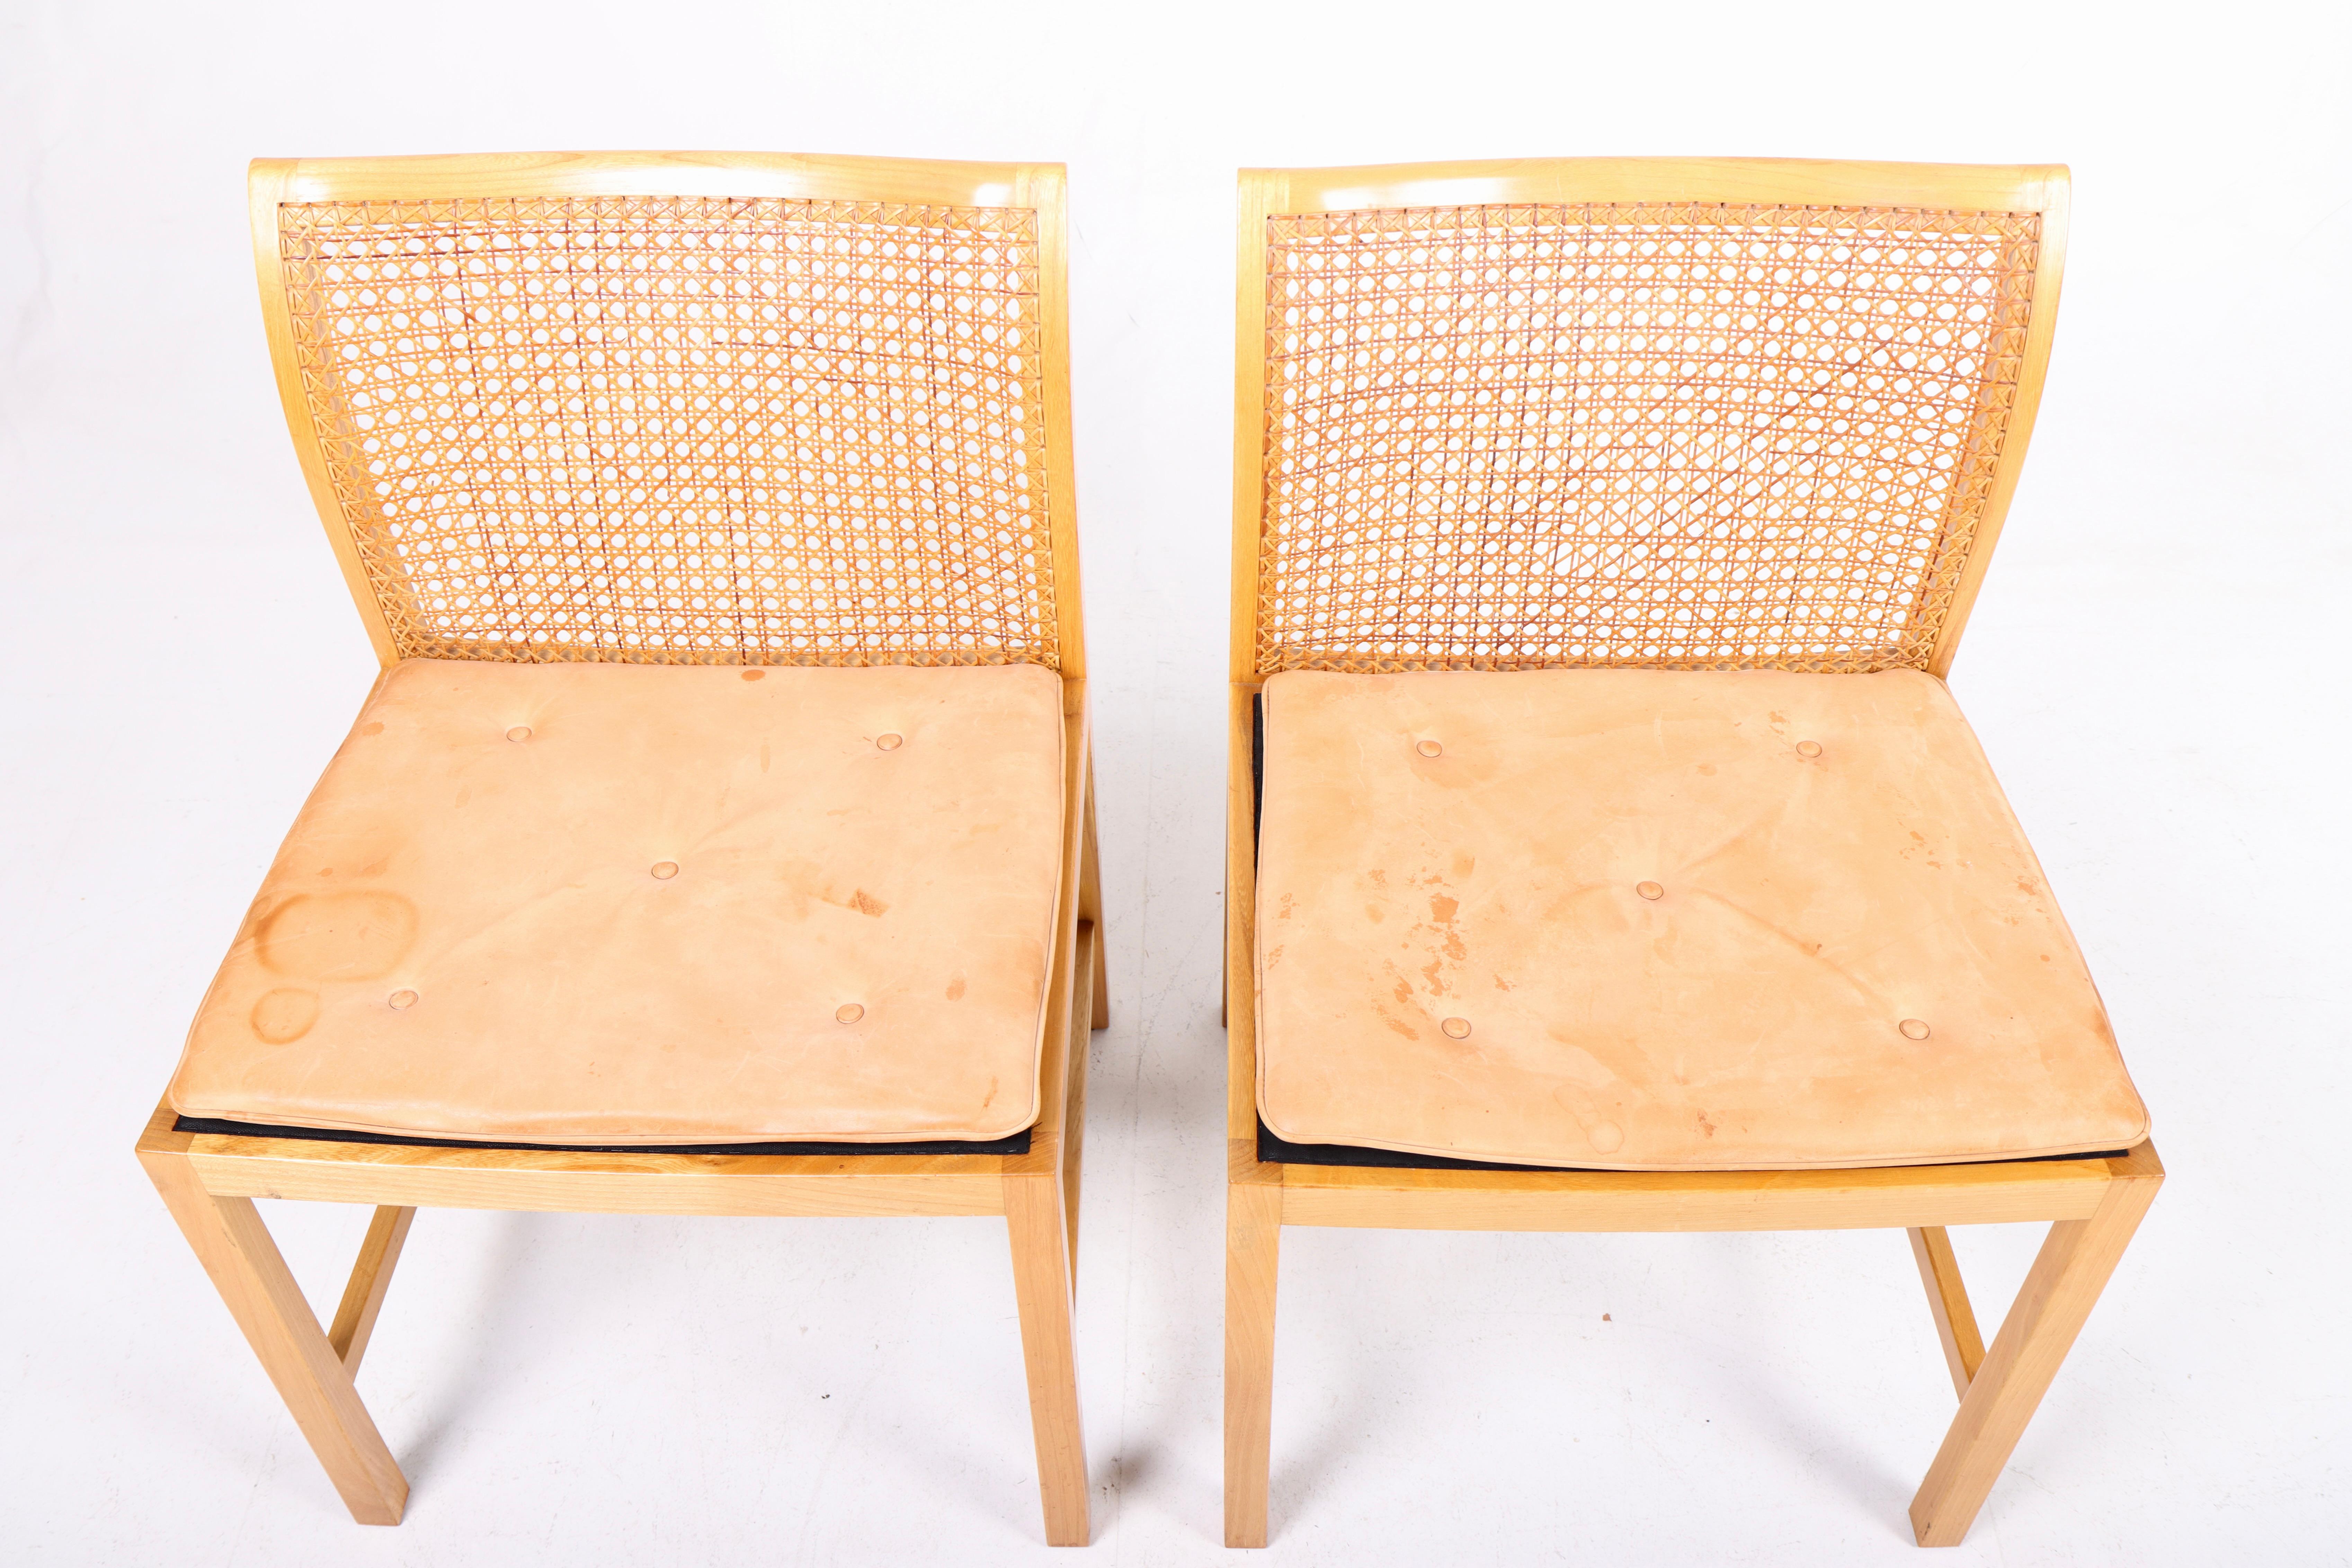 Scandinavian Modern Pair of Danish Midcentury Side Chairs in Ash and Cognac Leather, 1960s For Sale